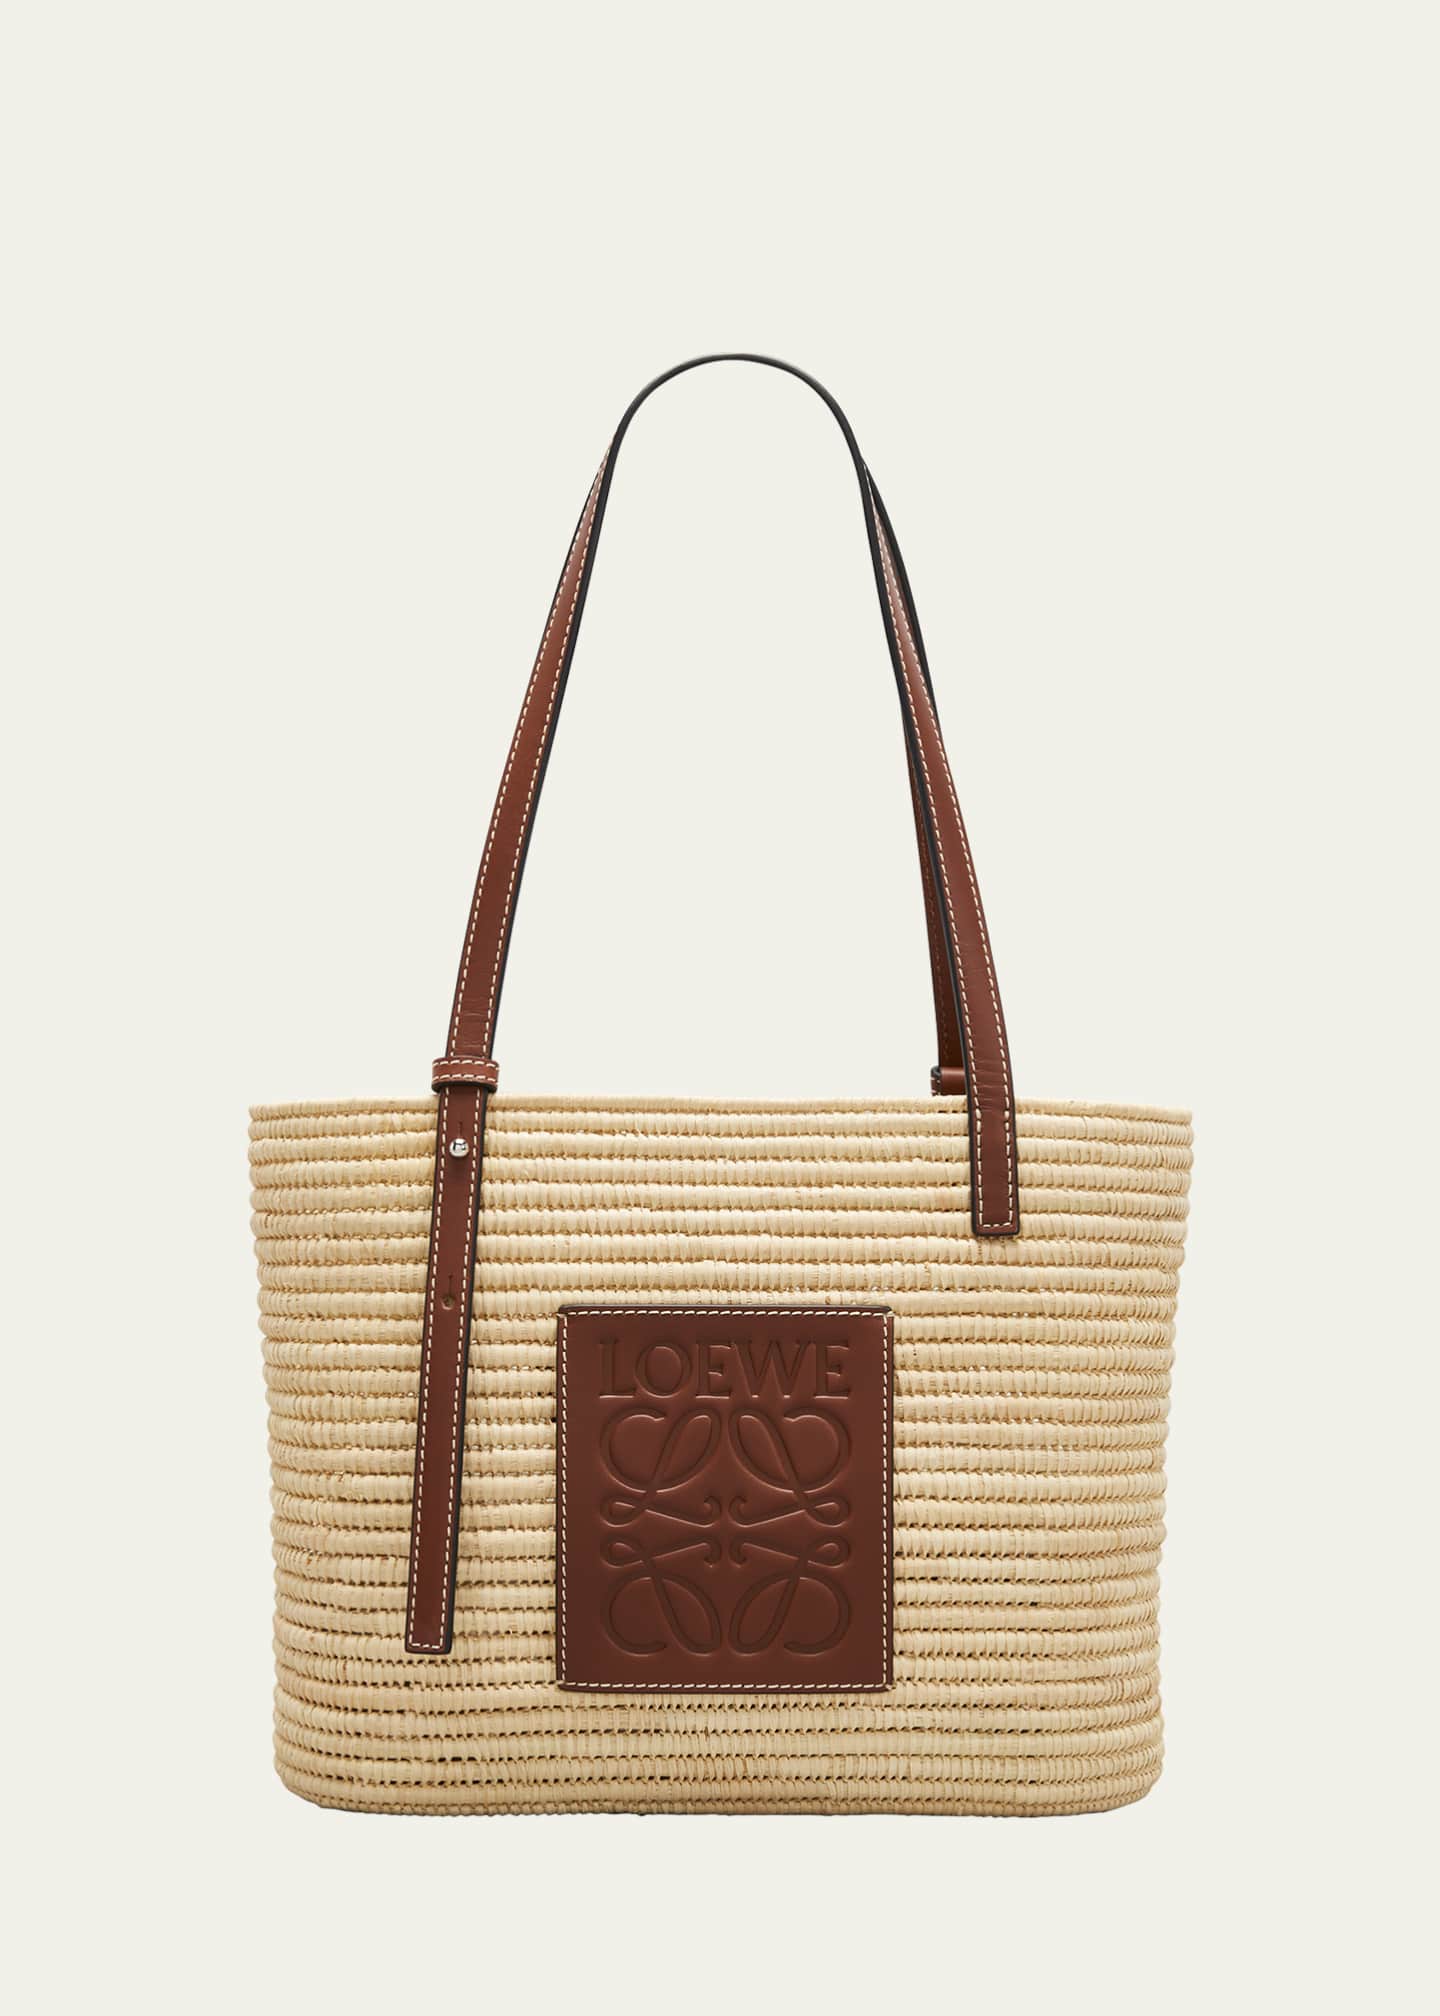 Loewe x Paula's Ibiza Square Basket Small Bag in Raffia with Leather Handles Image 1 of 5